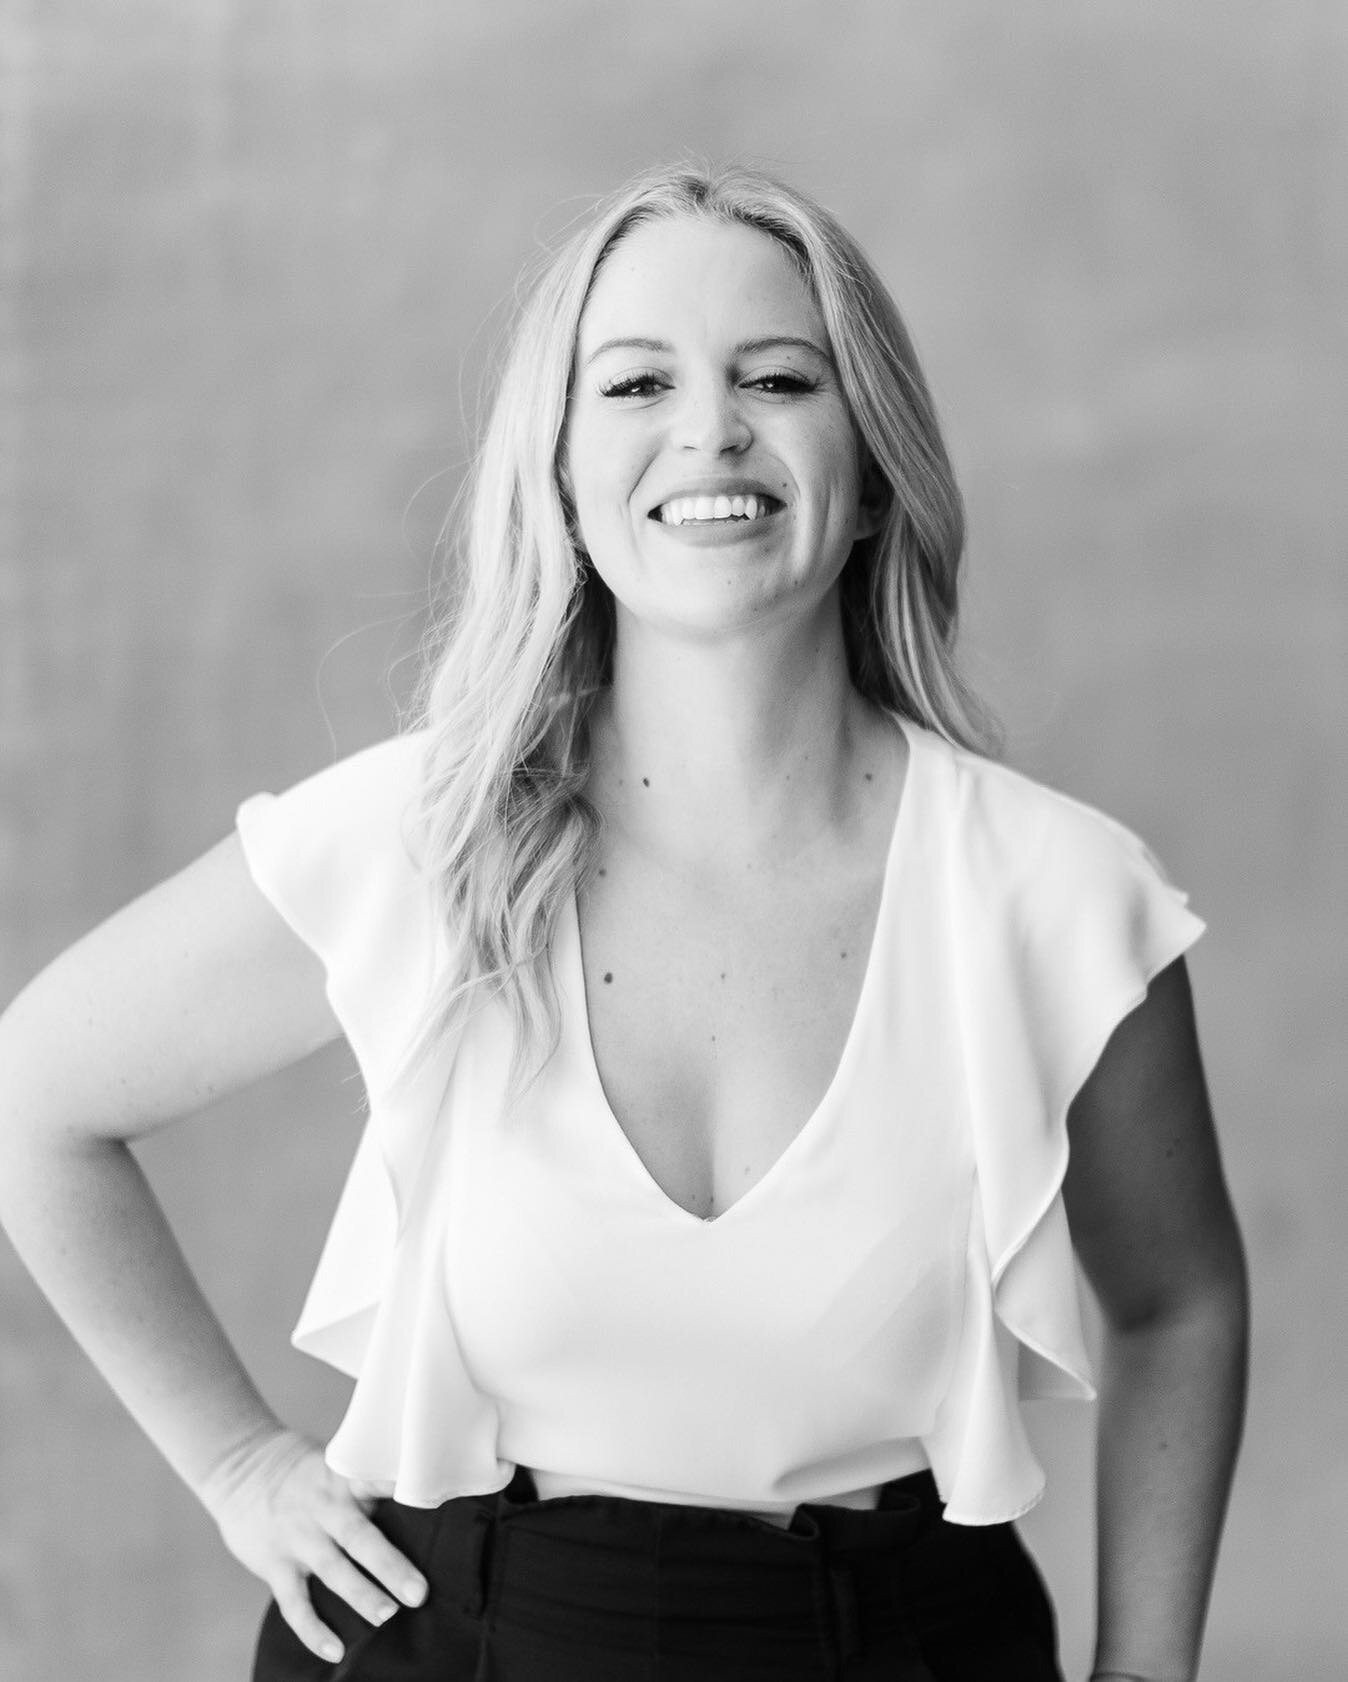 Meet Courtney &mdash; 
⠀⠀⠀⠀⠀⠀⠀⠀⠀
Courtney has been a licensed esthetician for over a decade. Since becoming an esthetician, she has worked in Chicago at high-end spas and hotels. Courtney received Steiner Transocean beauty training in London and work